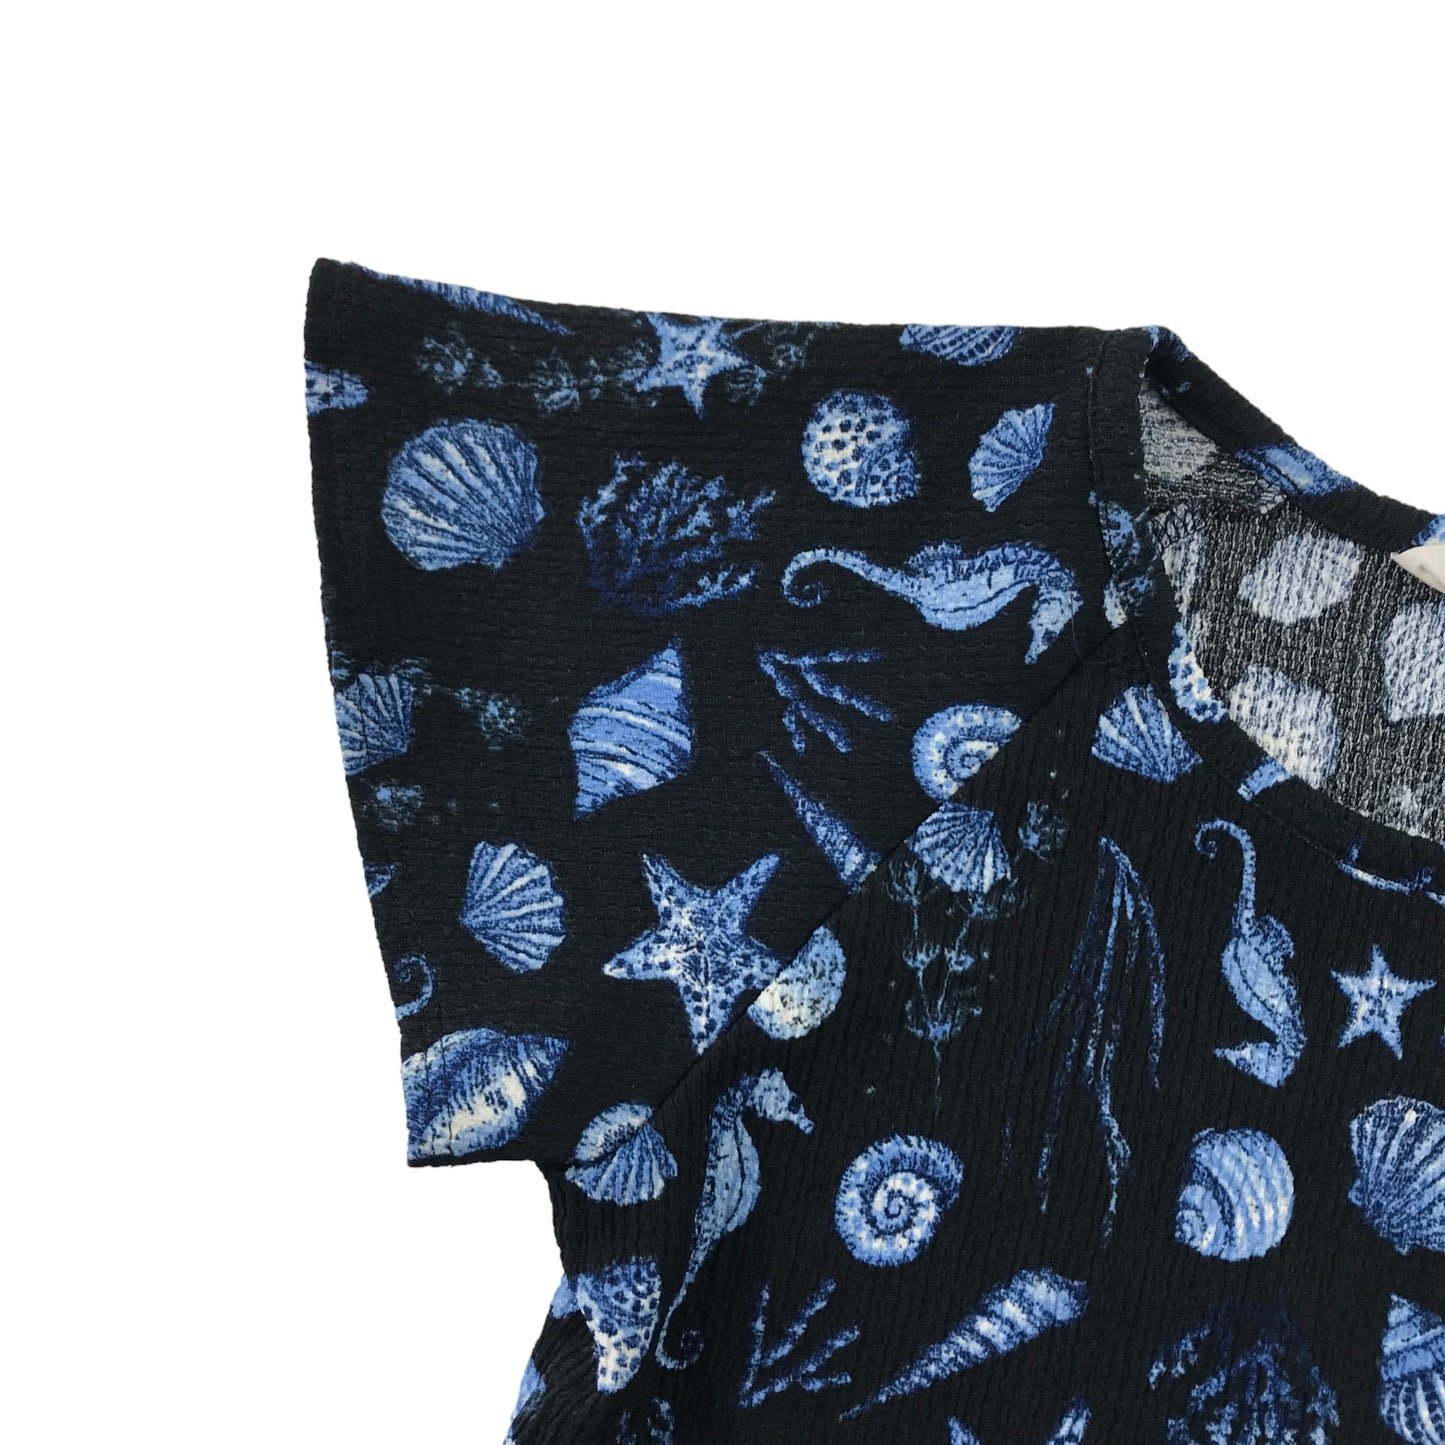 H&M Top Age 8 Black and Blue Seashell Pattern Cropped